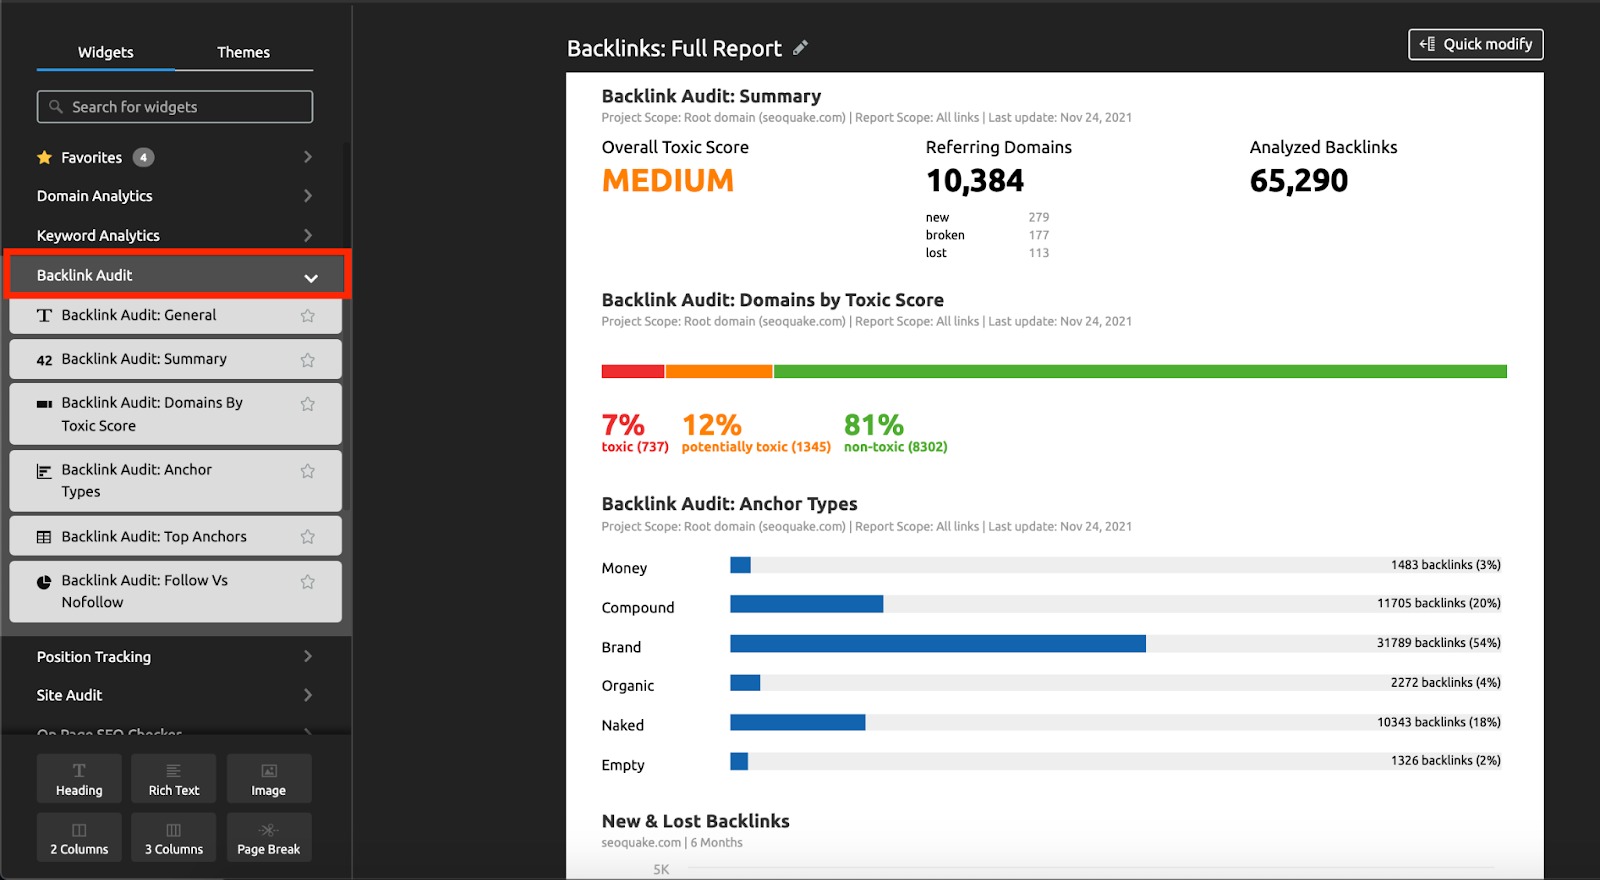 Easy Reporting with Semrush image 5